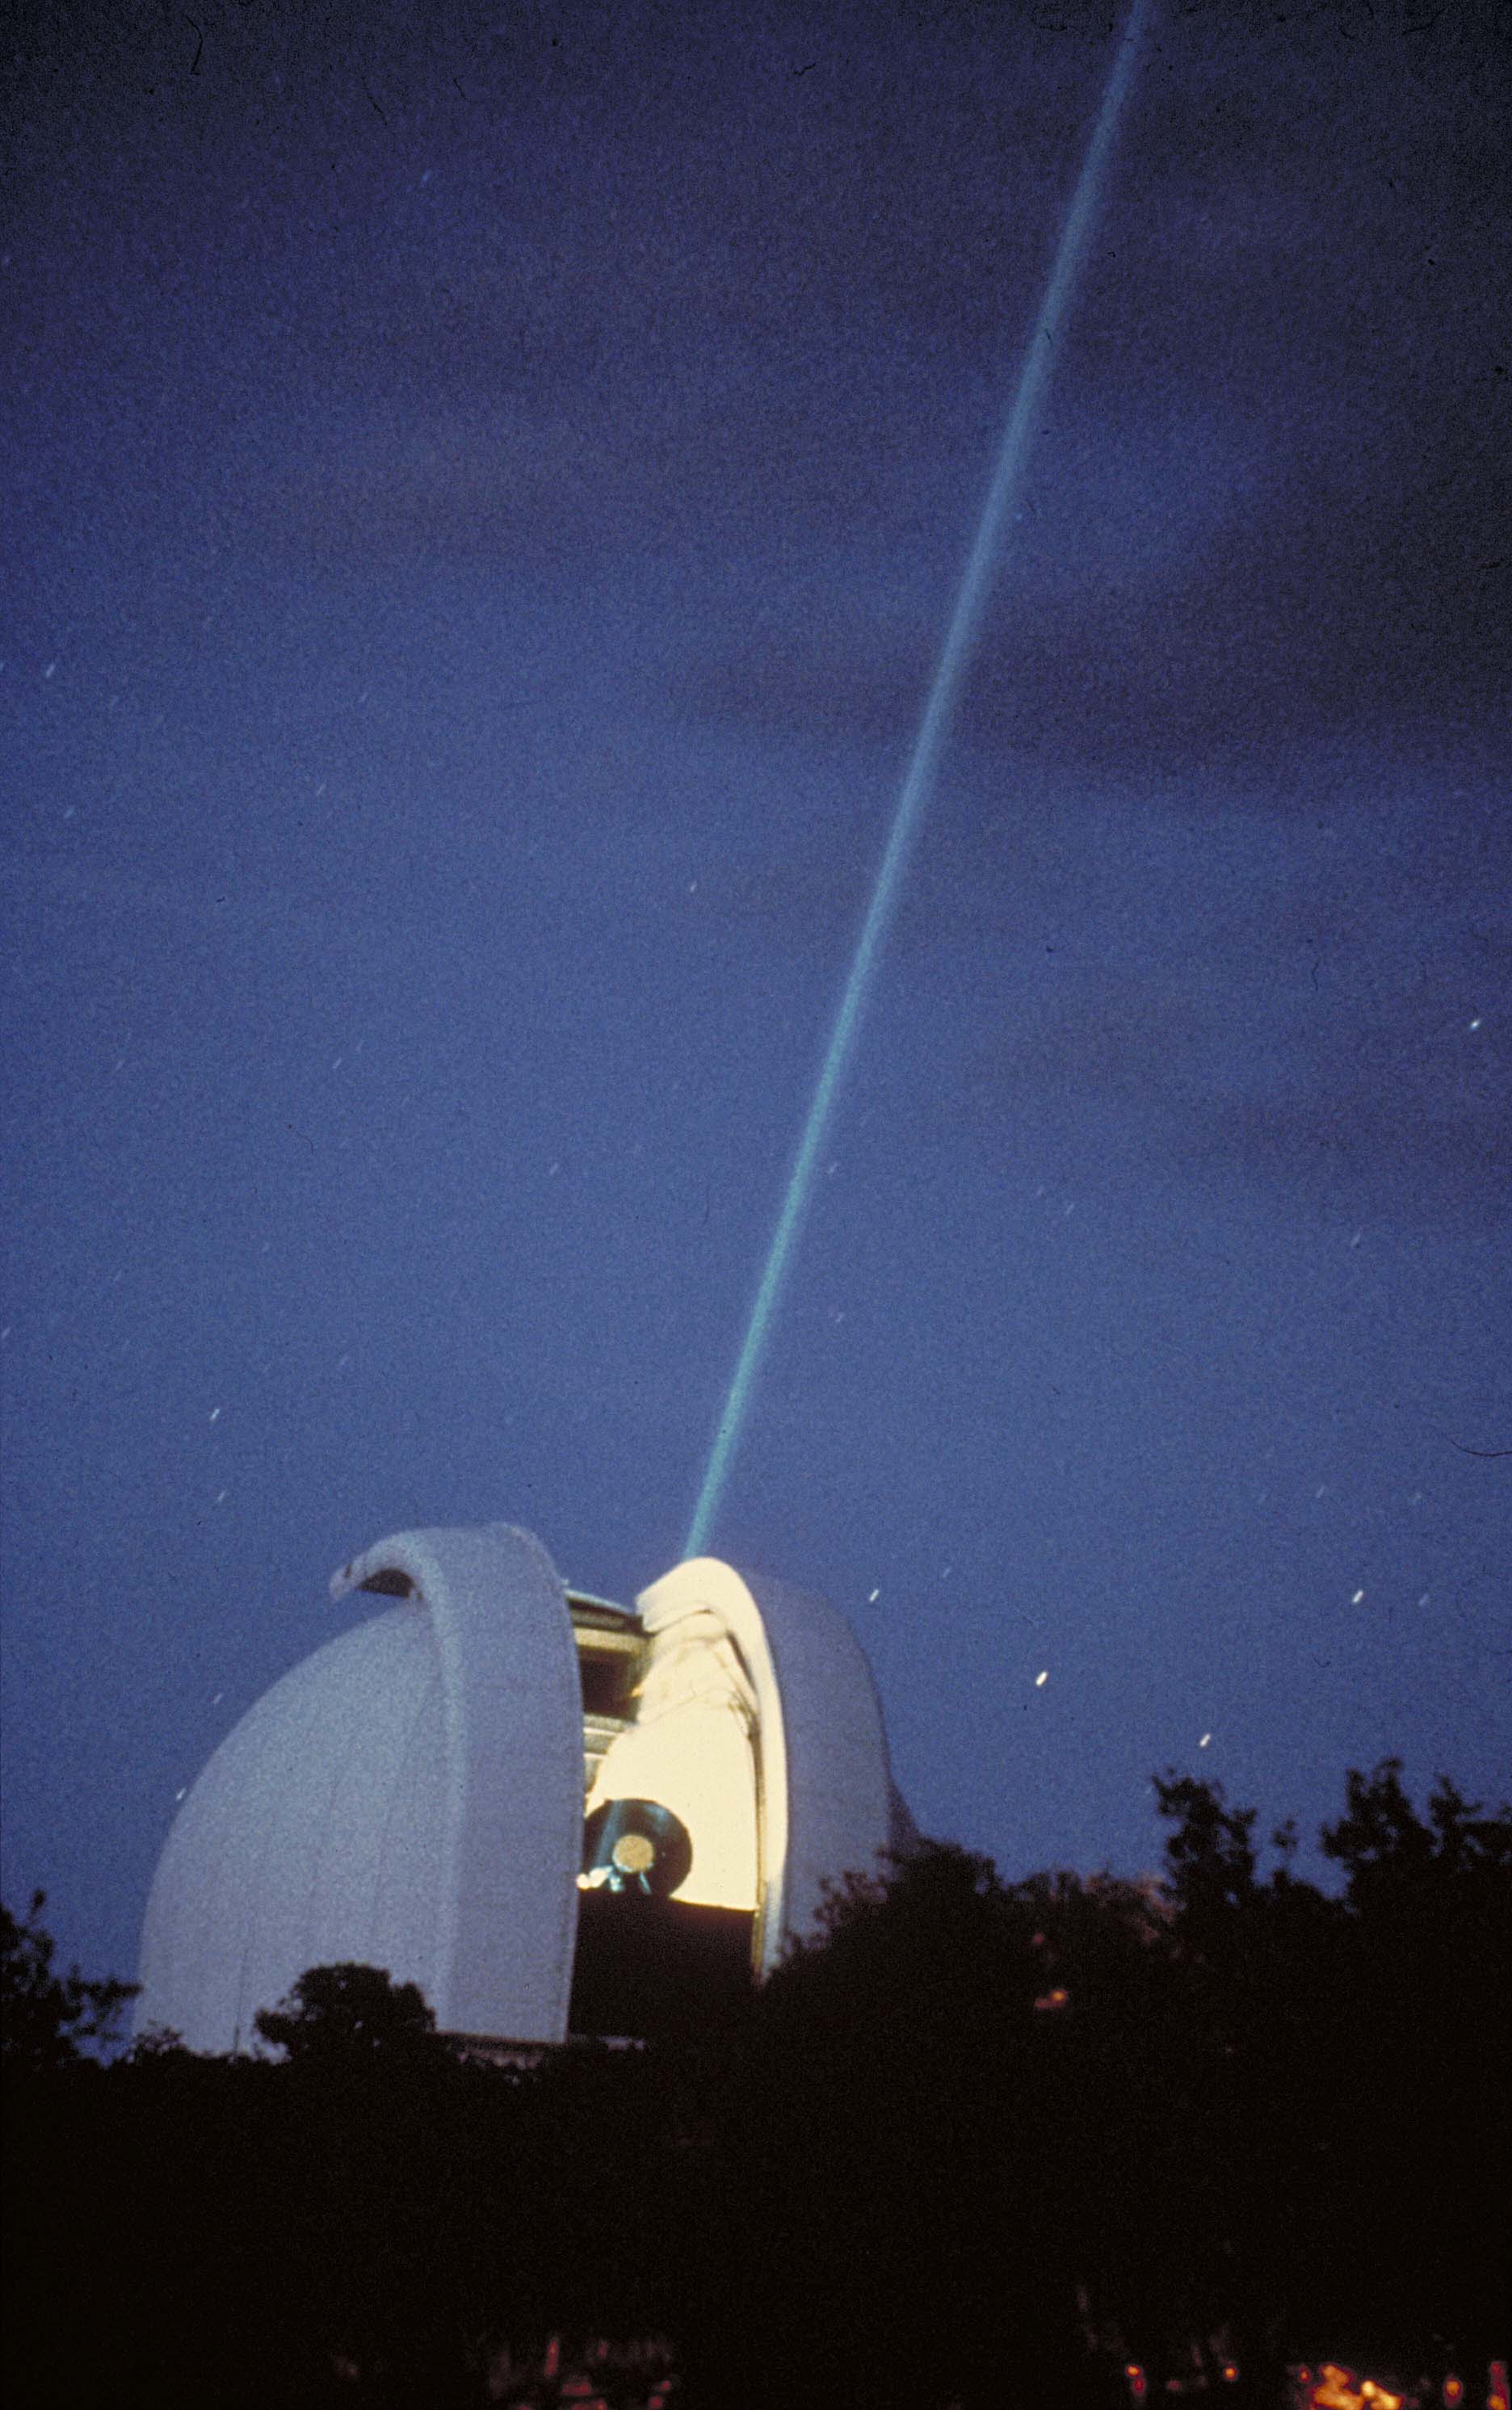 McDonald Observatory astronomers measured the Earth-Moon distance by beaming a laser from the 2.7-meter Harlan J. Smith Telescope to reflectors placed on the Moon by Apollo astronauts. Credit: Frank Armstrong/UT-Austin.